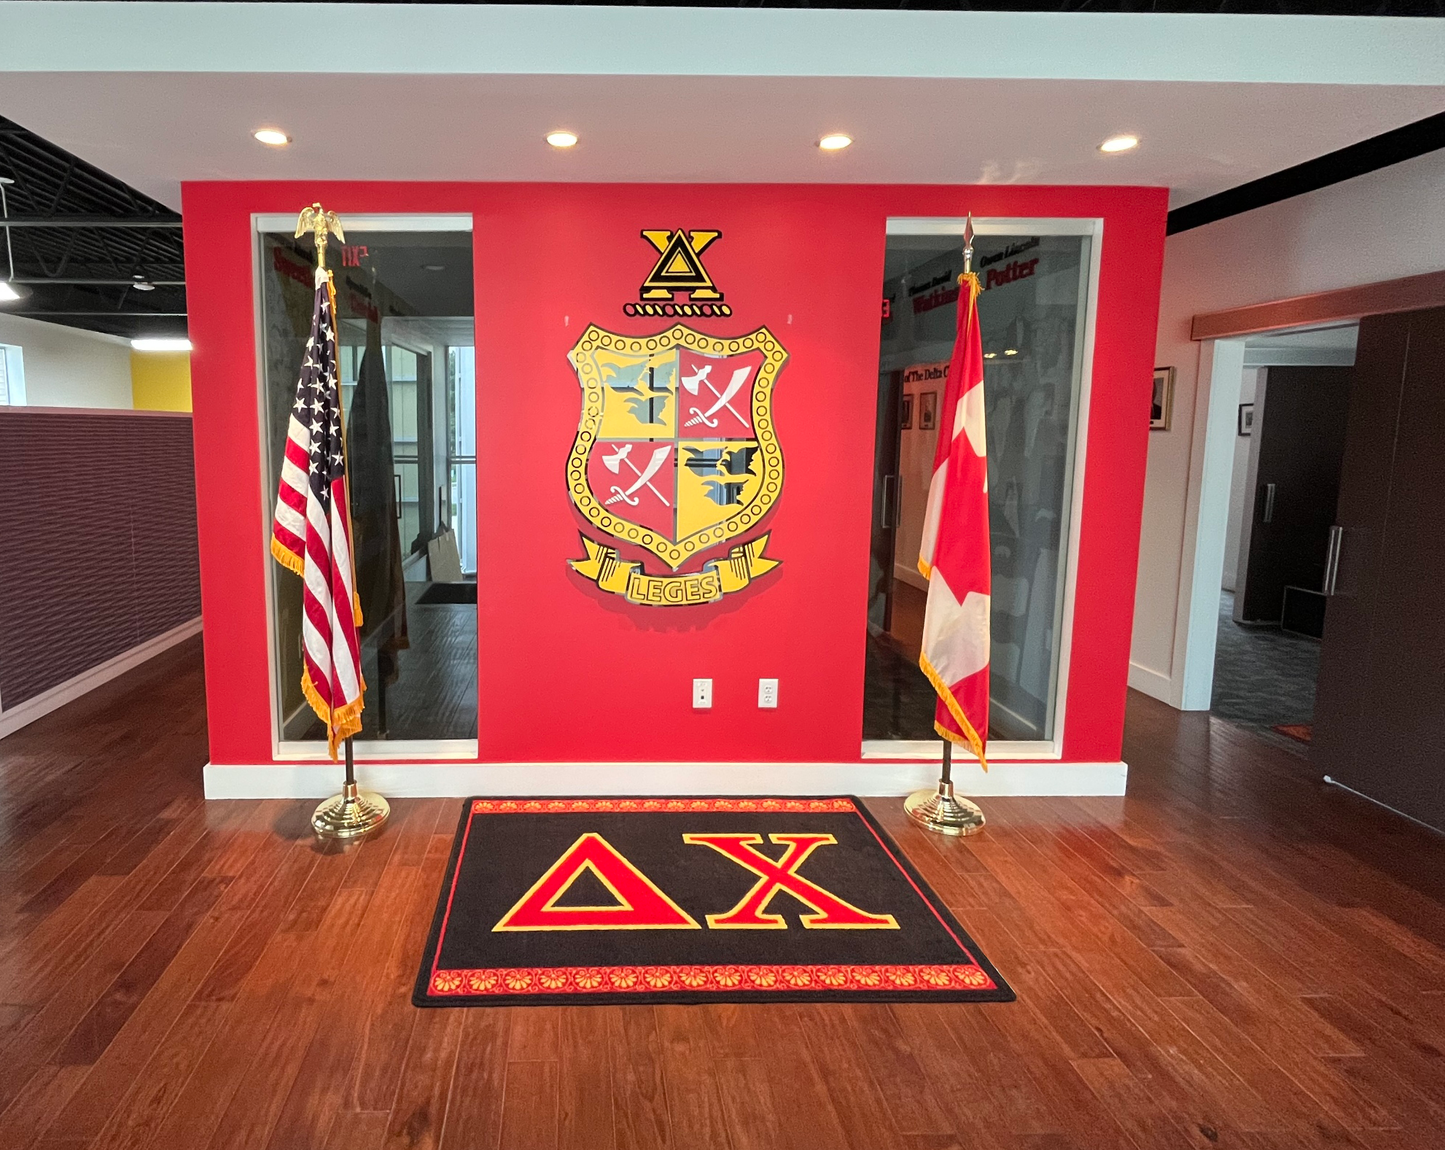 Delta Chi "Letters" Rug (3'10" x 5'4")